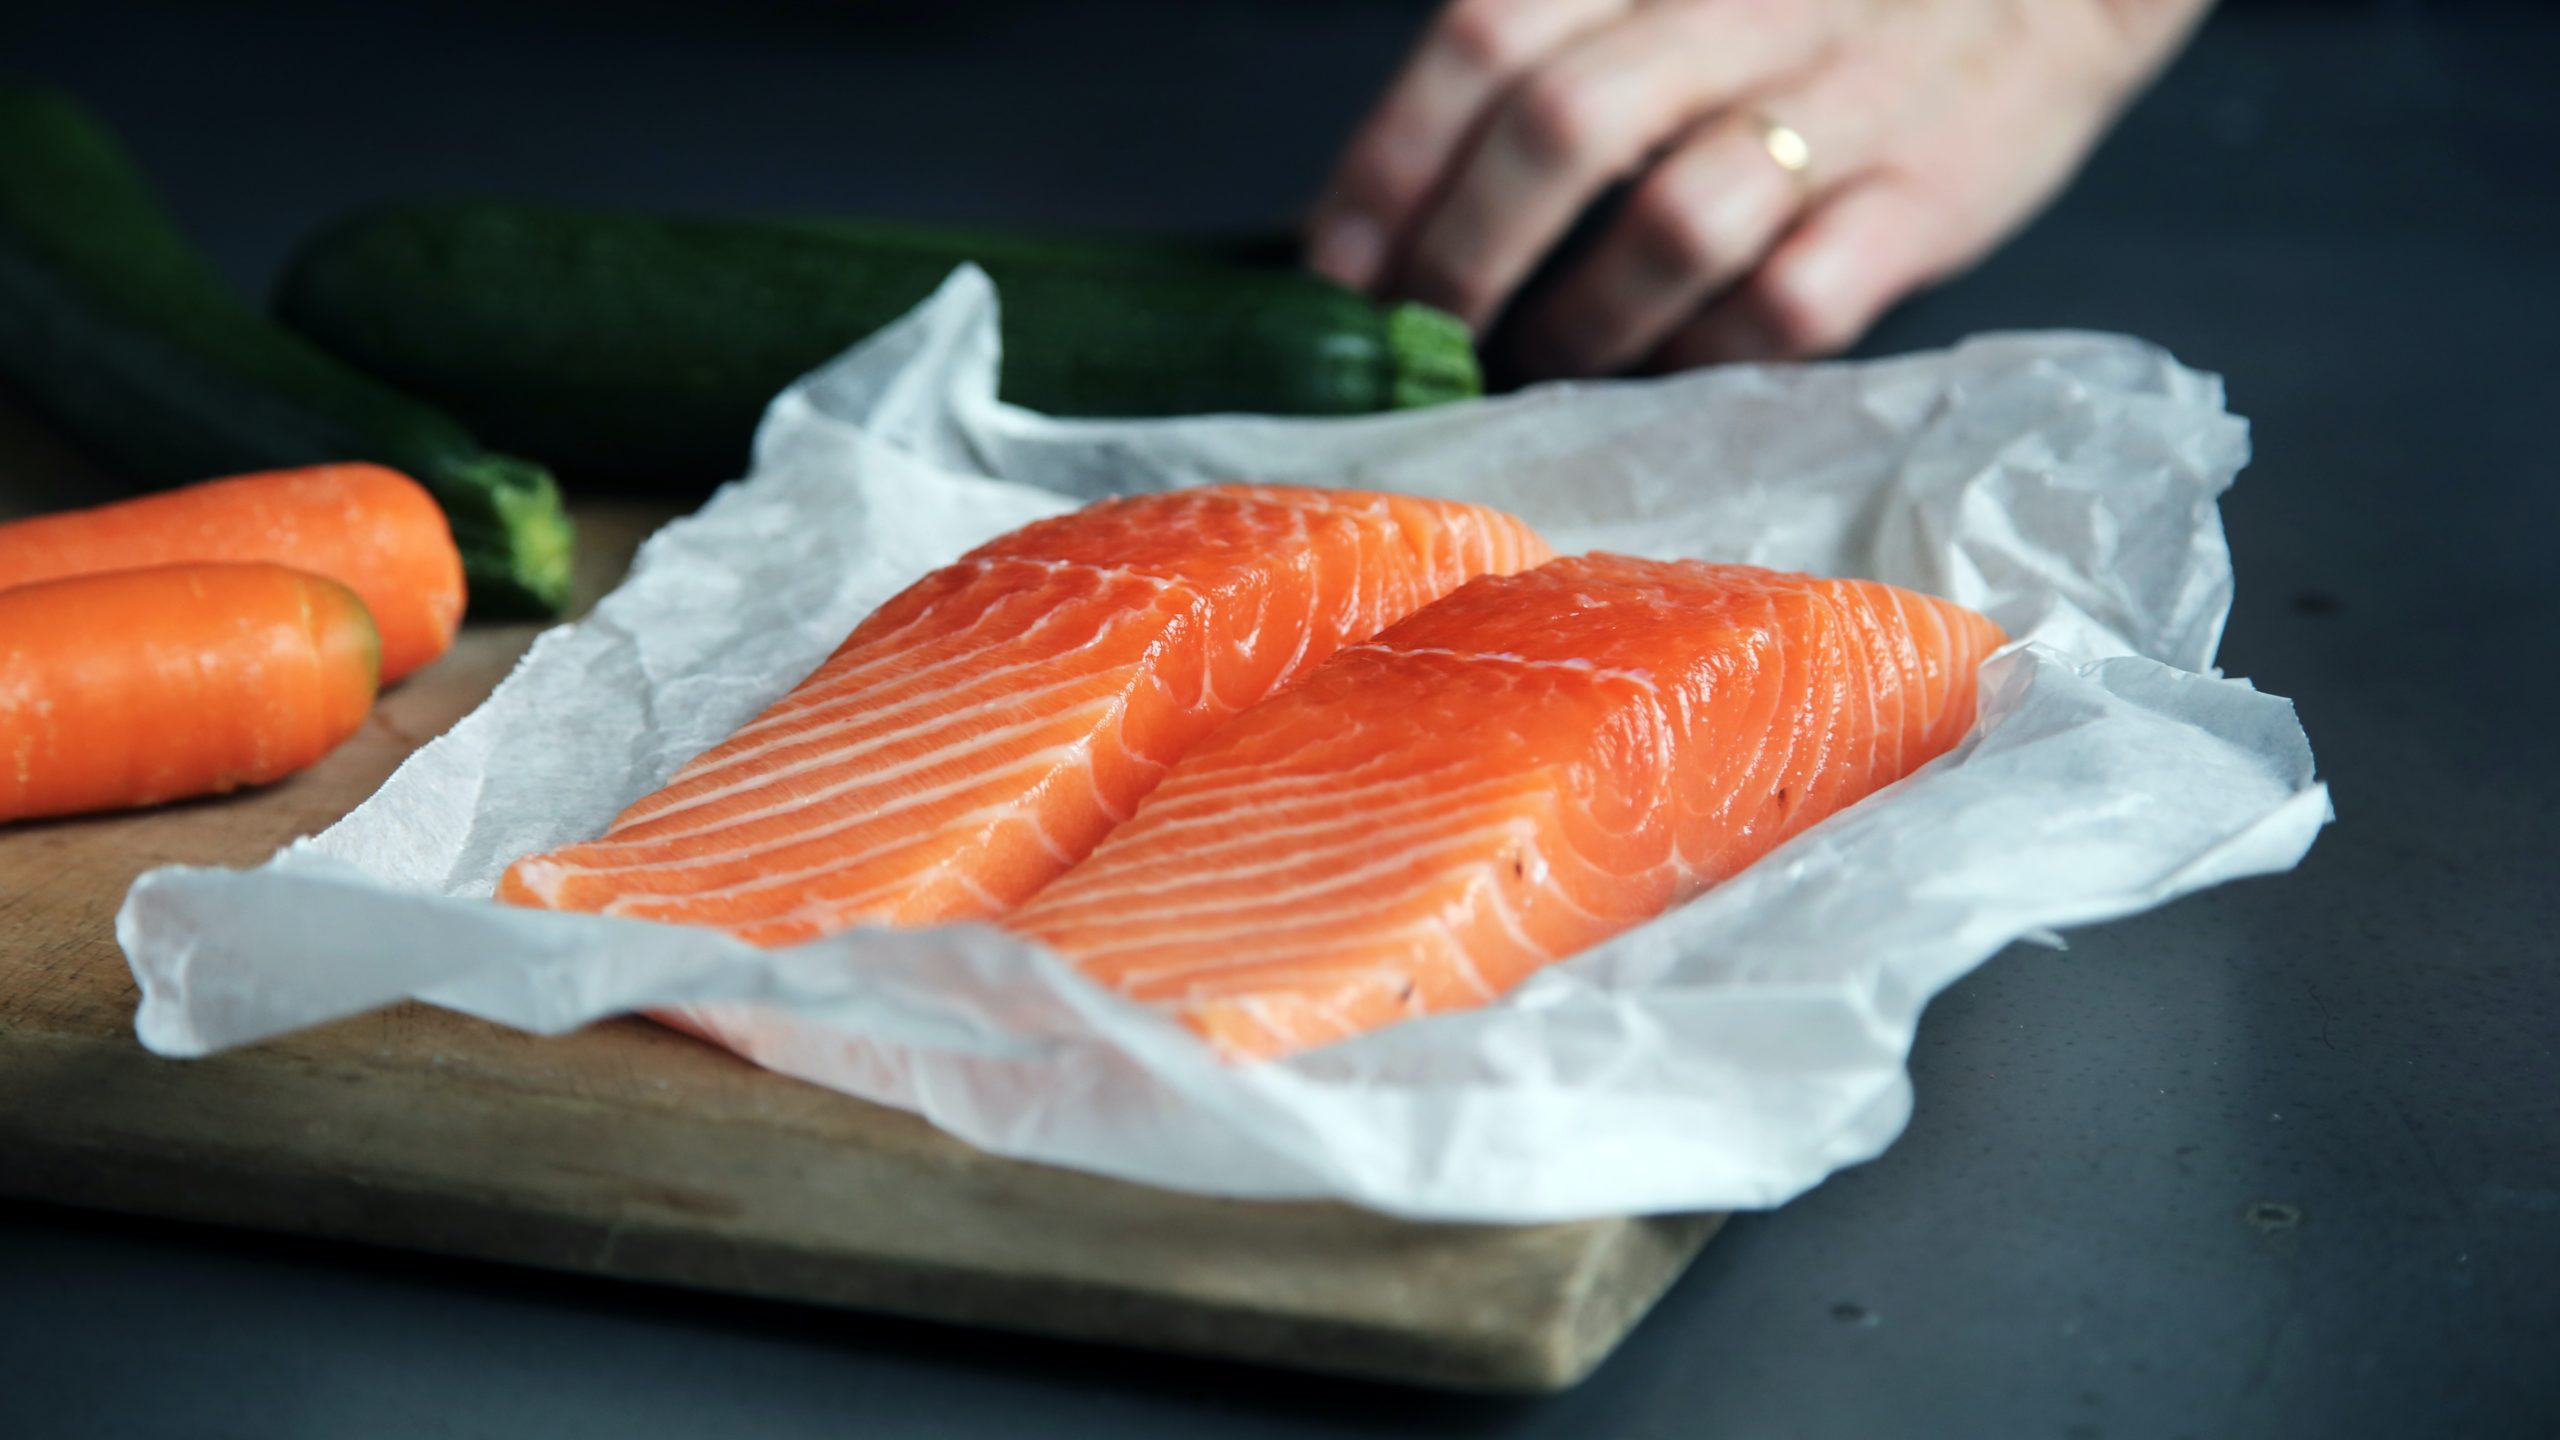 Two salmon steaks. Salmon is a great source of B vitamins, including B6, B9 and B12. Image from Unsplash.